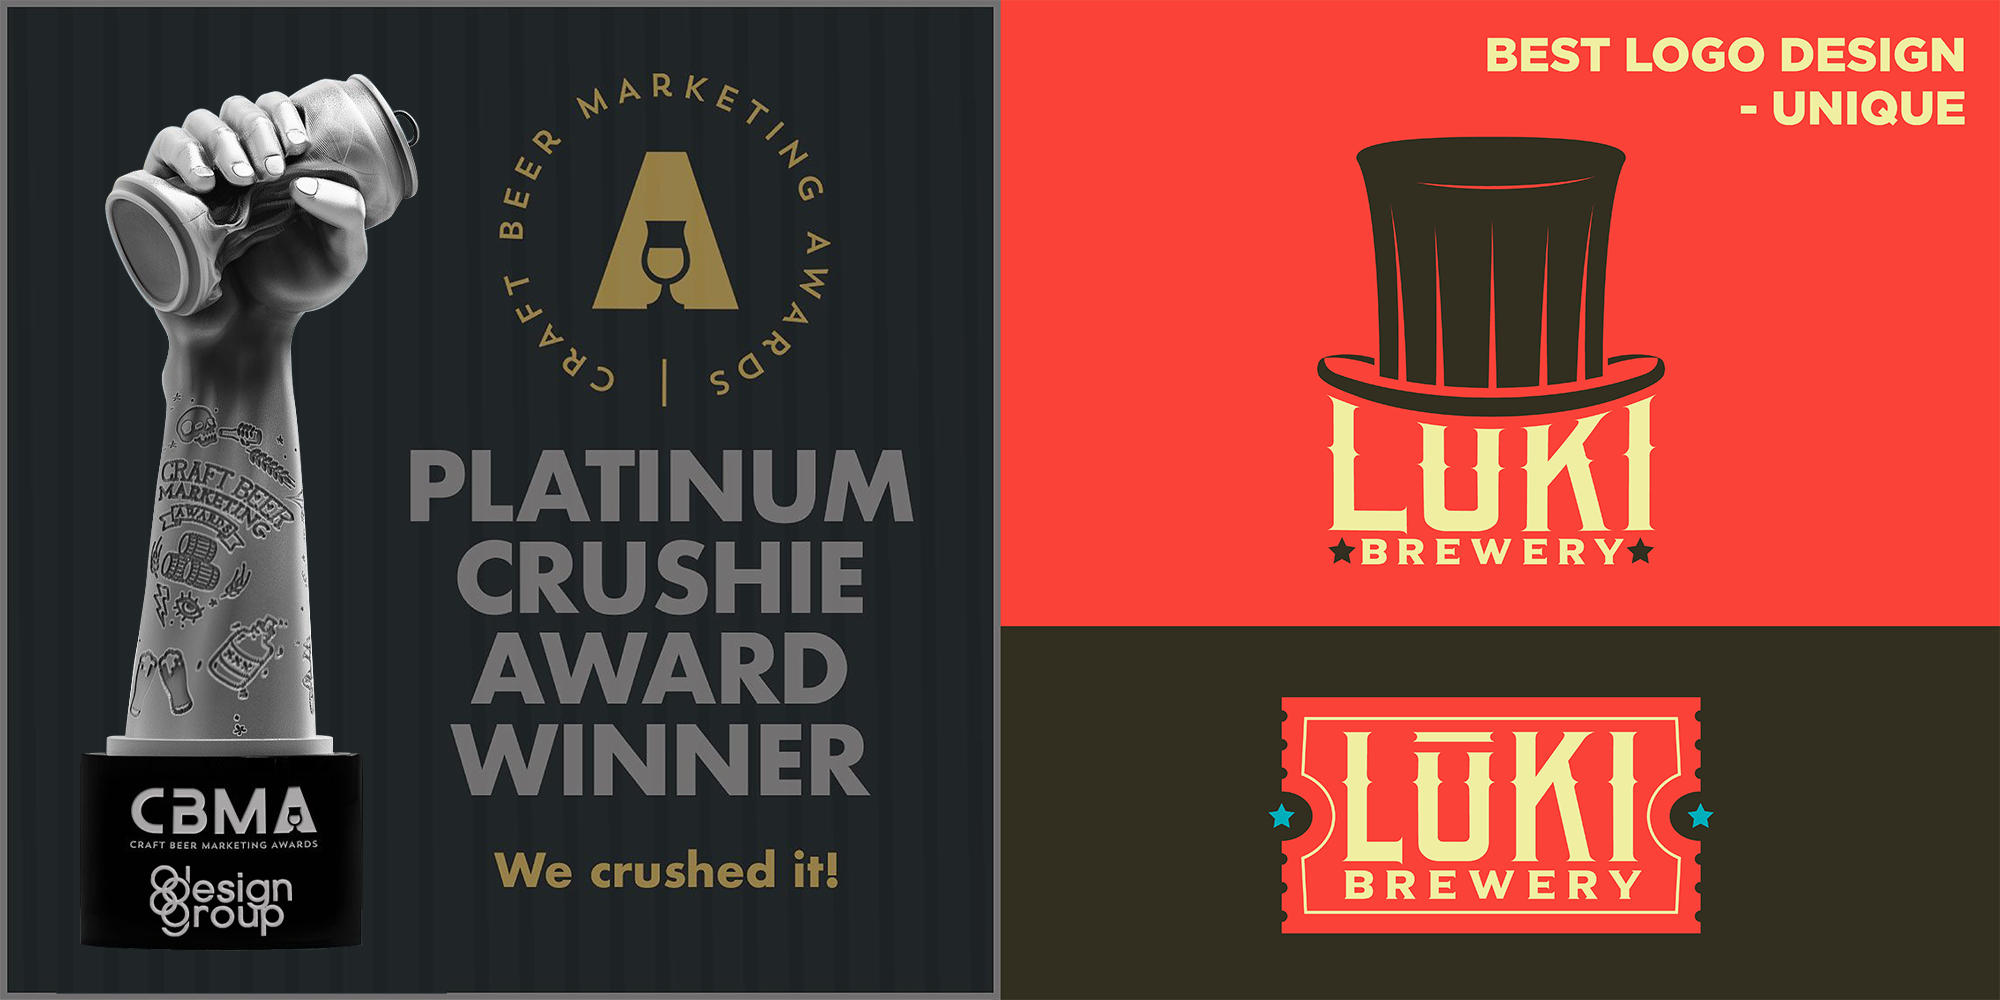 Best Logo Design / Unique for LUKI Brewery Awarded to 88 Design Group